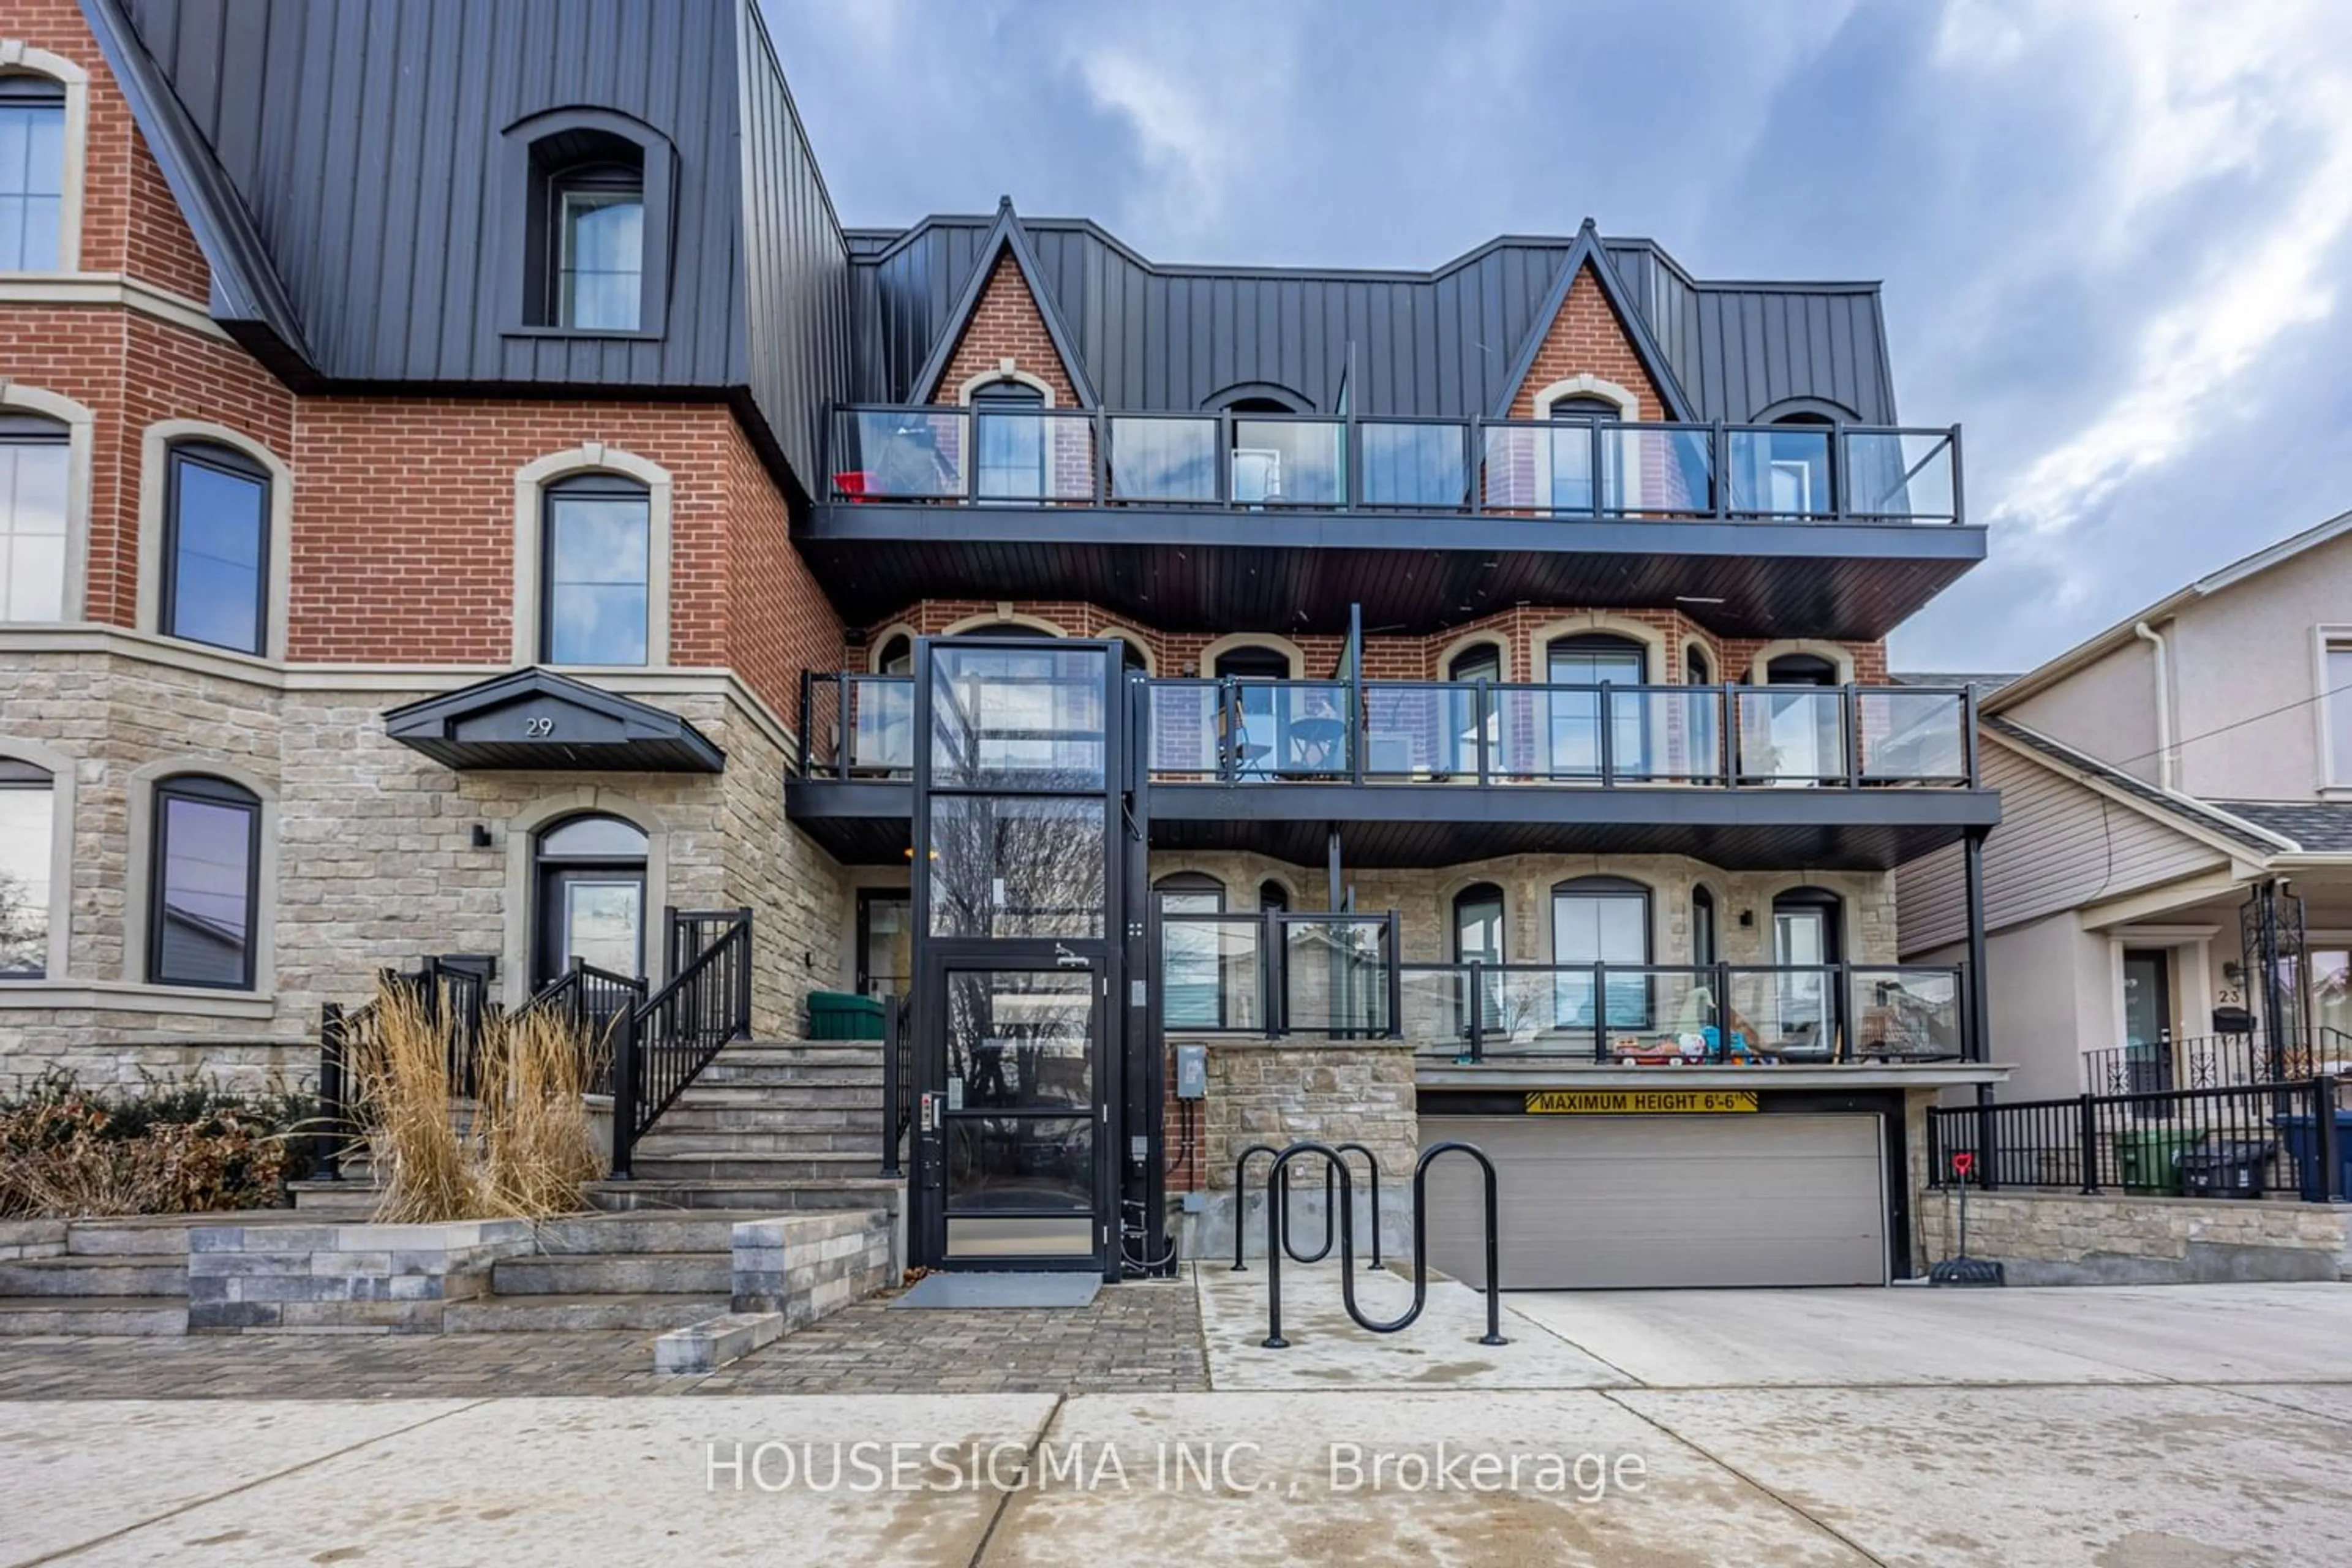 Home with stone exterior material for 27 Somers Ave #302, Toronto Ontario M4J 1W2